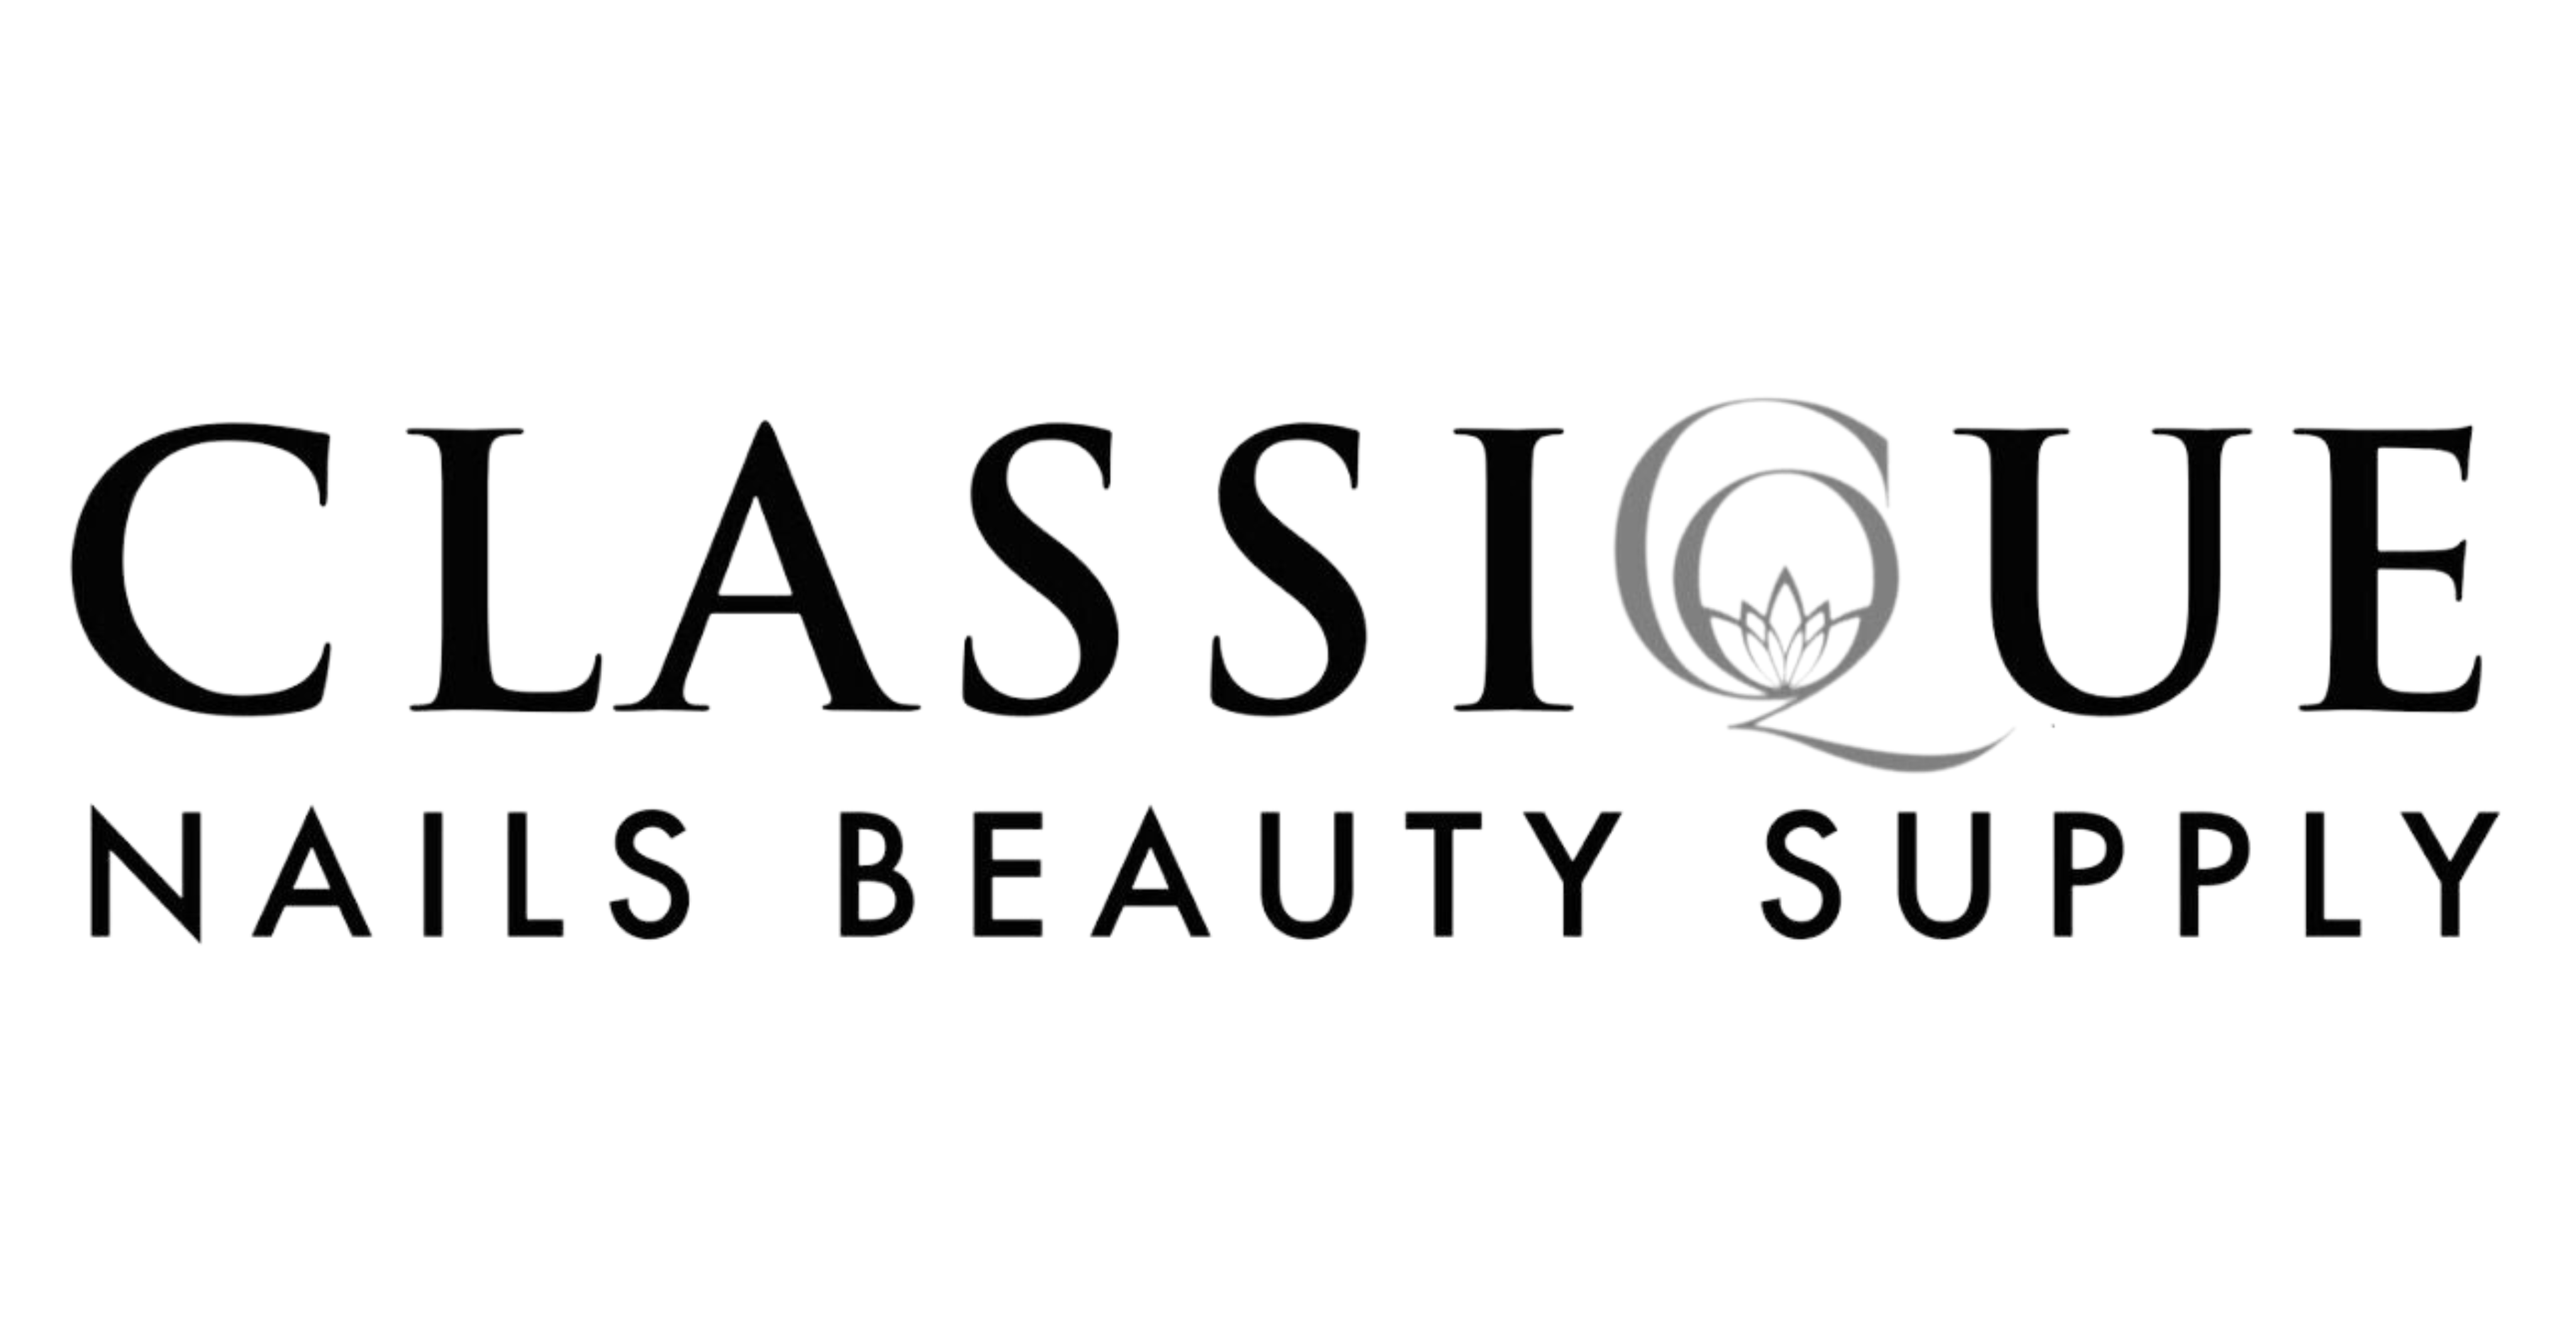 beauty supply stores near me, classique nails beauty supply, nail supply near me, nail supply store near me, canada nail supply, hair supply store near me, best korean skin care products